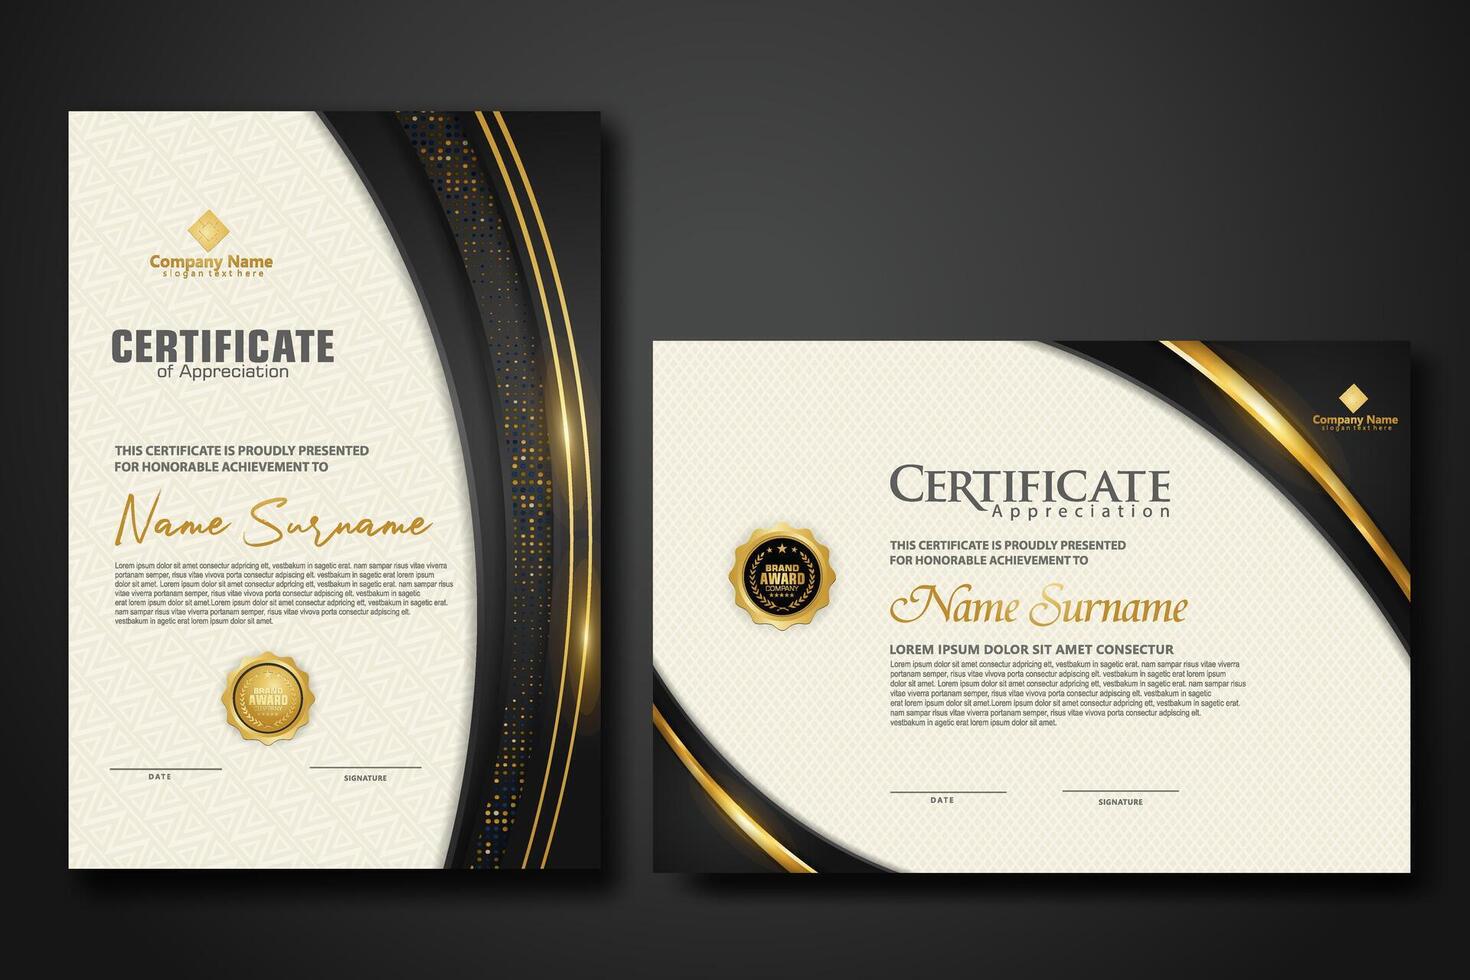 Luxury certificate template with glitter effect dan lines gold shine on frame background vector